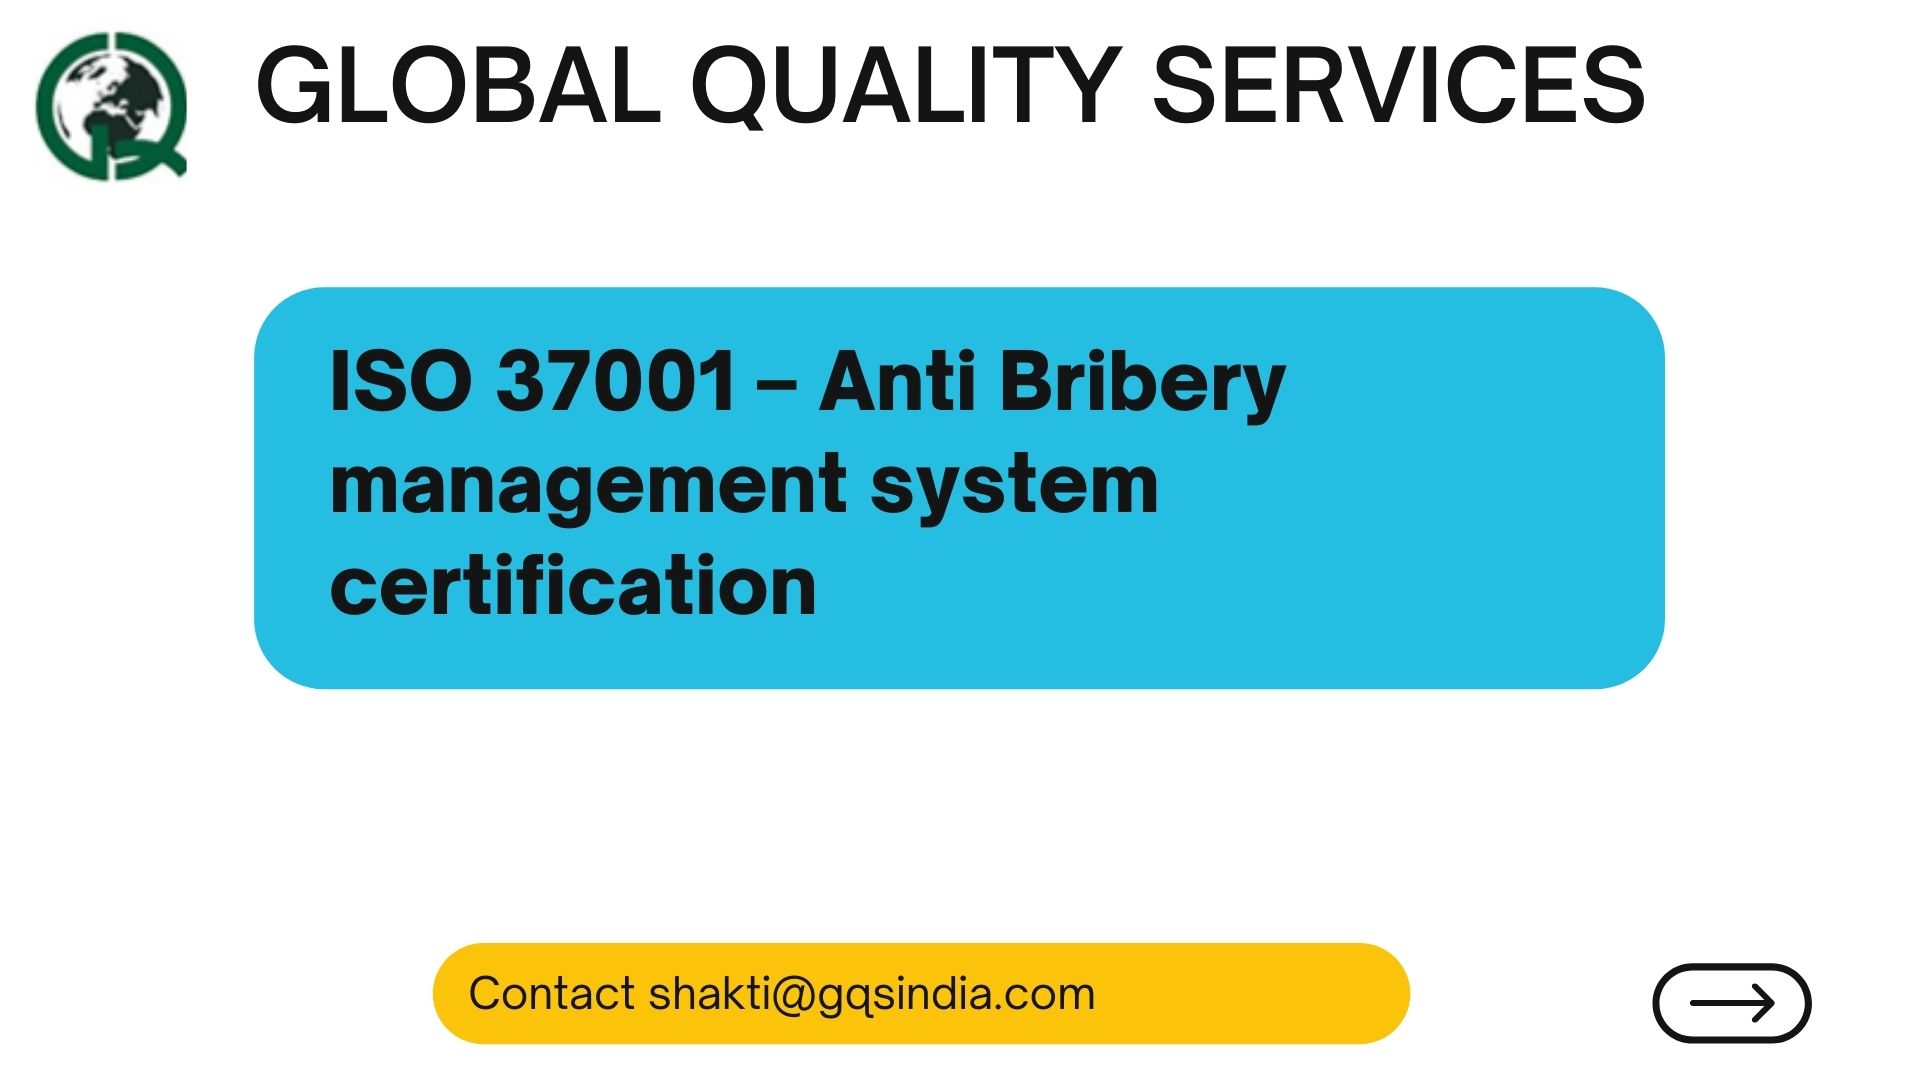 ISO 37001 – Anti Bribery management system certification (1)